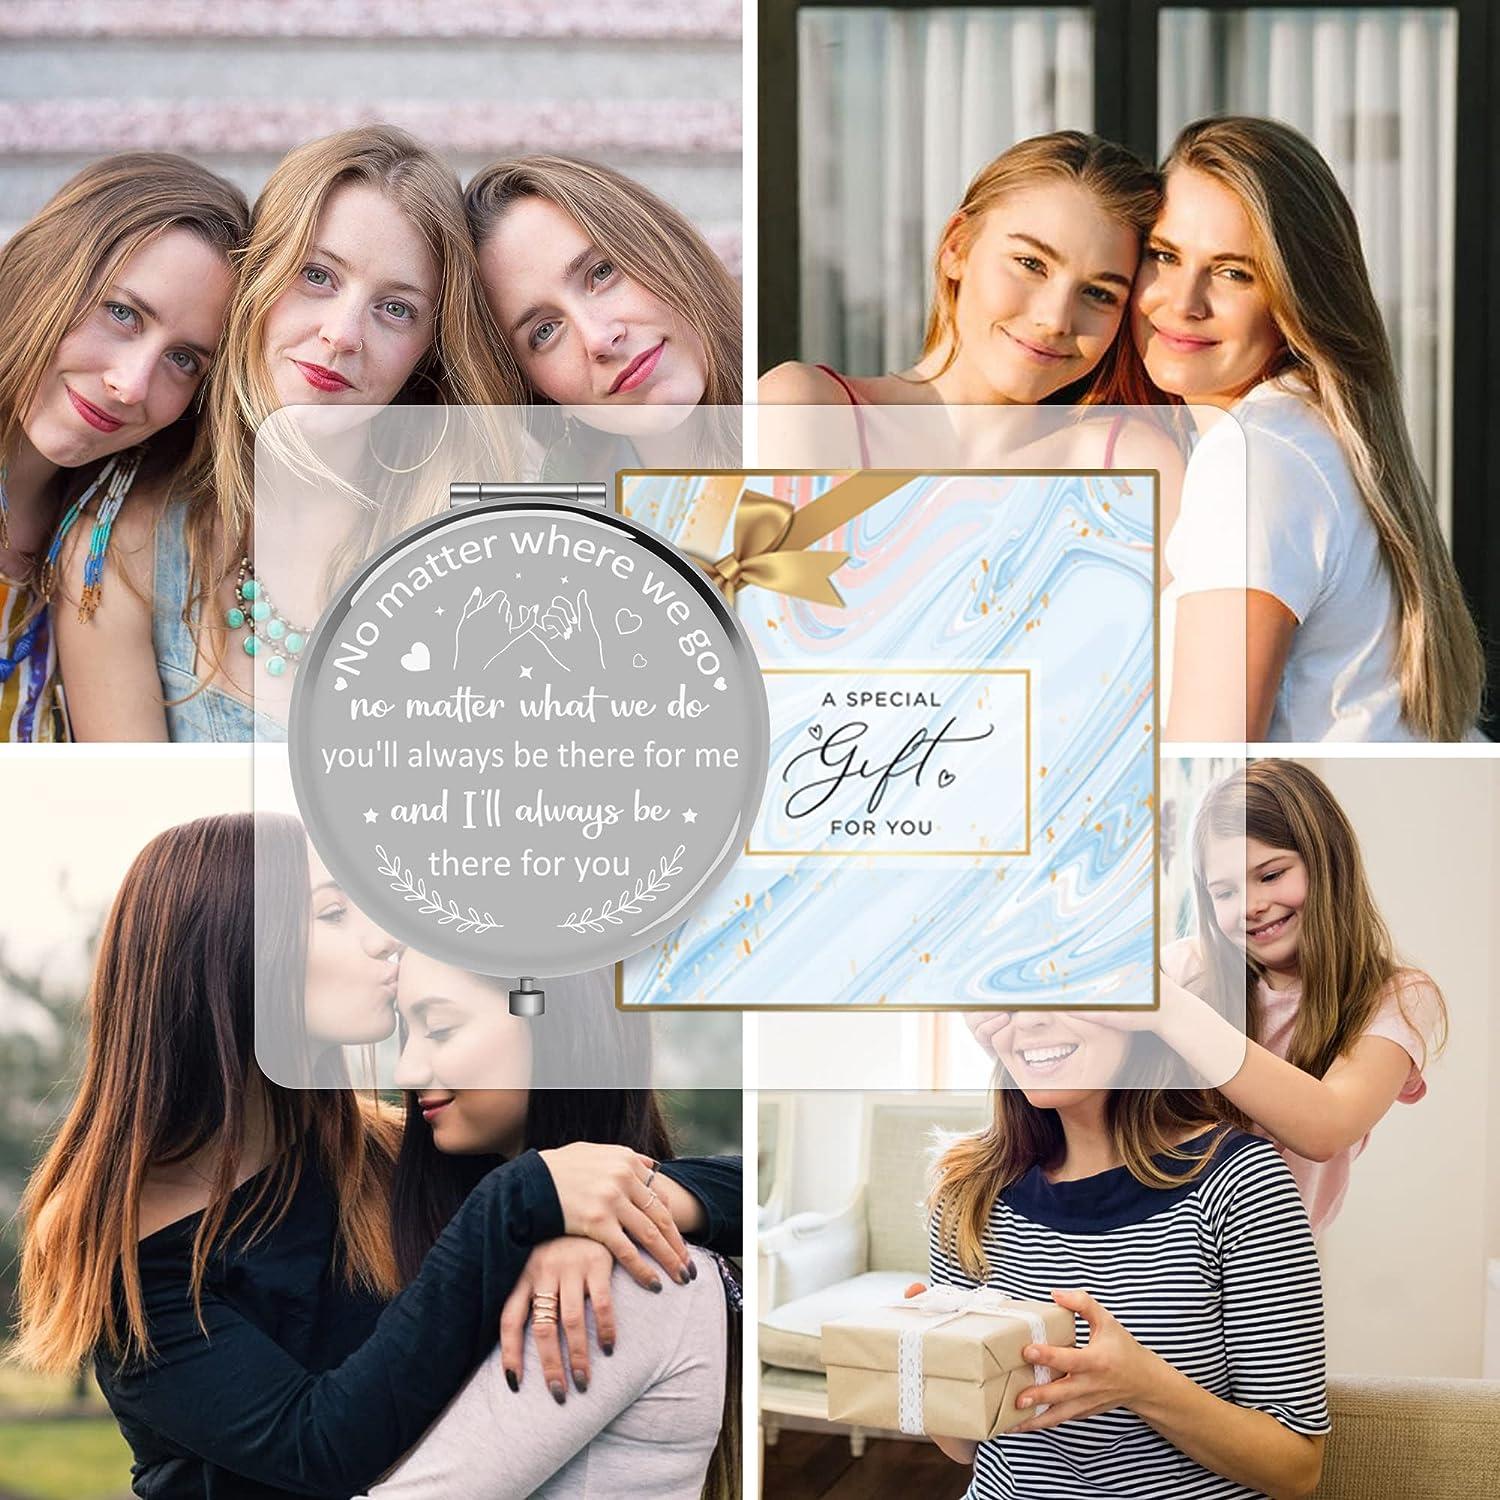 Friendship Gifts for Women Friends - Gifts for Friends Female, Gifts for  Best Friends Women, Friend Gifts for Women - Birthday Gifts for Women